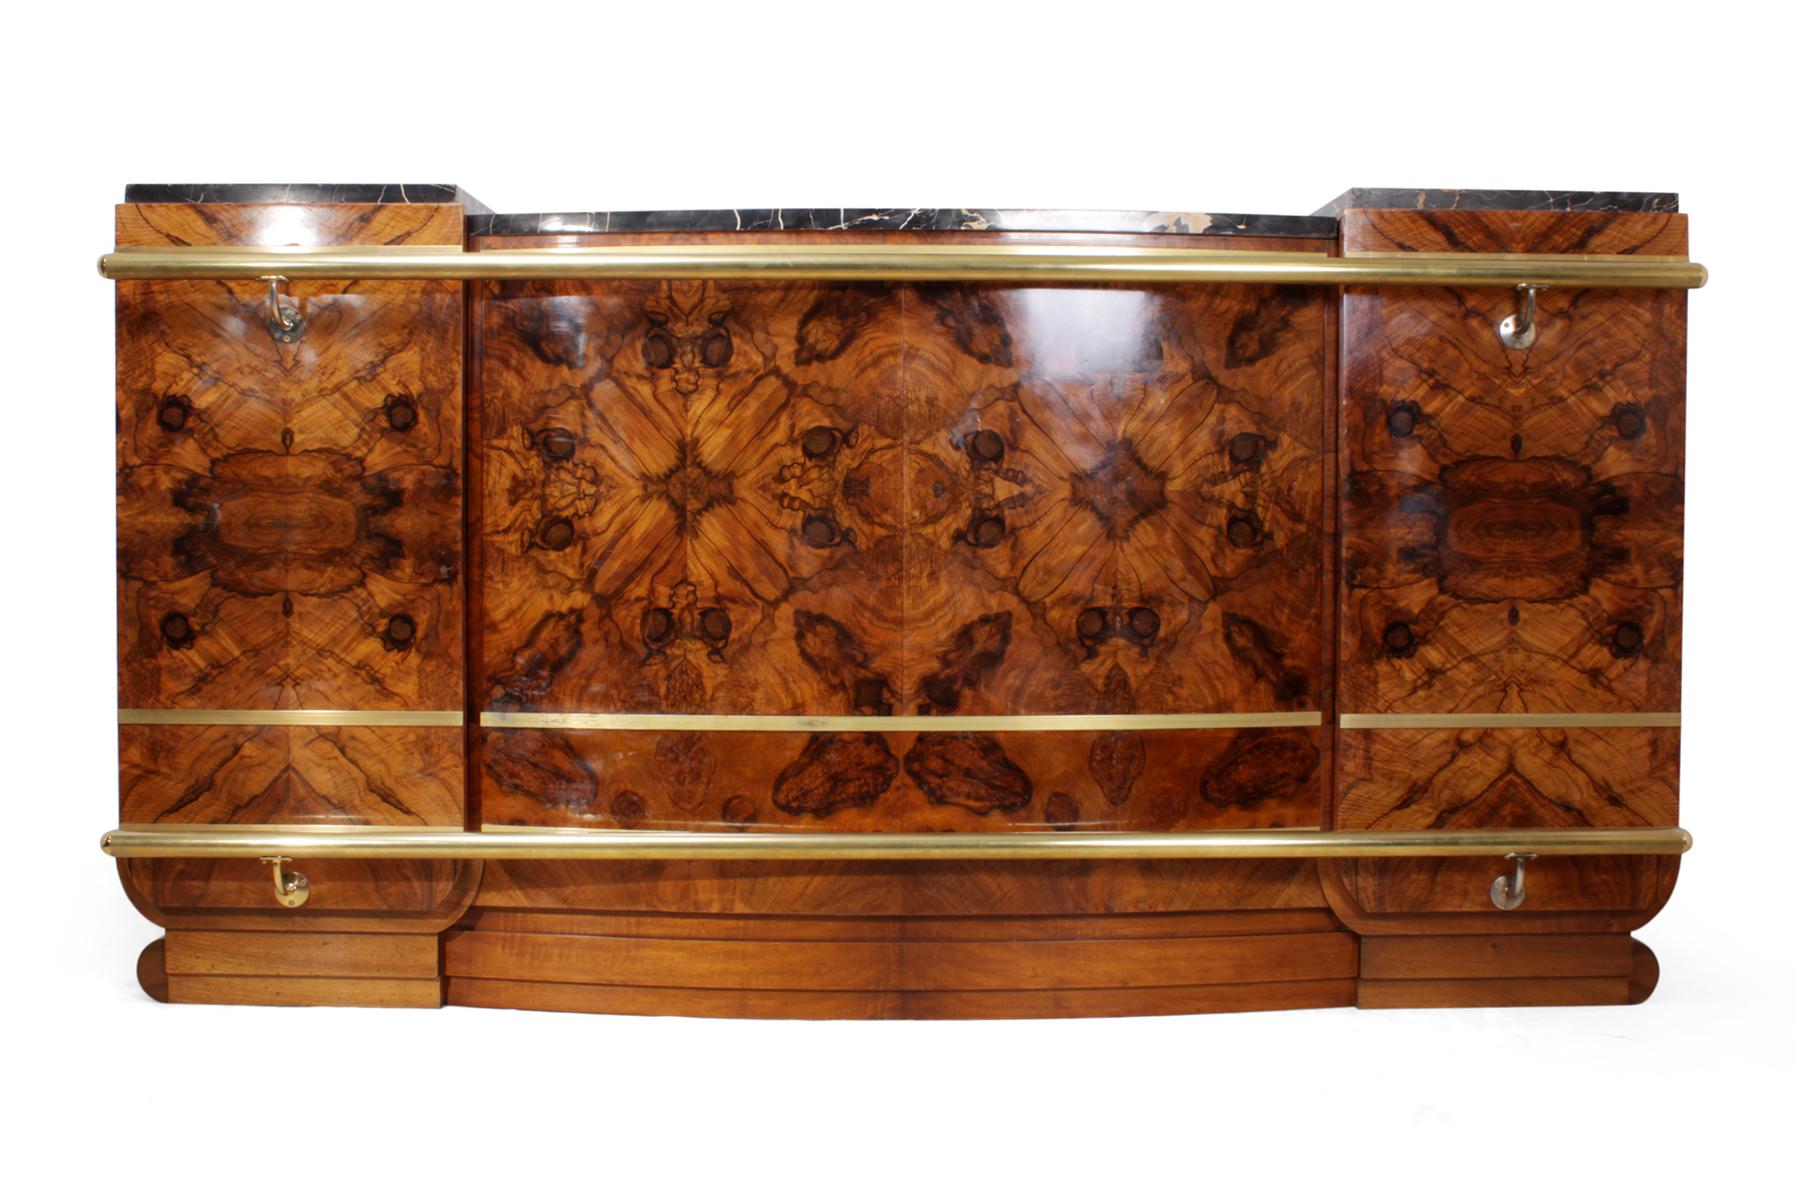 Large Art Deco bar in walnut
This French bar has come out of a cocktail bar in the south of France, this made from two 1930s sideboards by cabinetmakers, it is very large with a figured walnut front solid mahogany base, brass rails top and bottom,